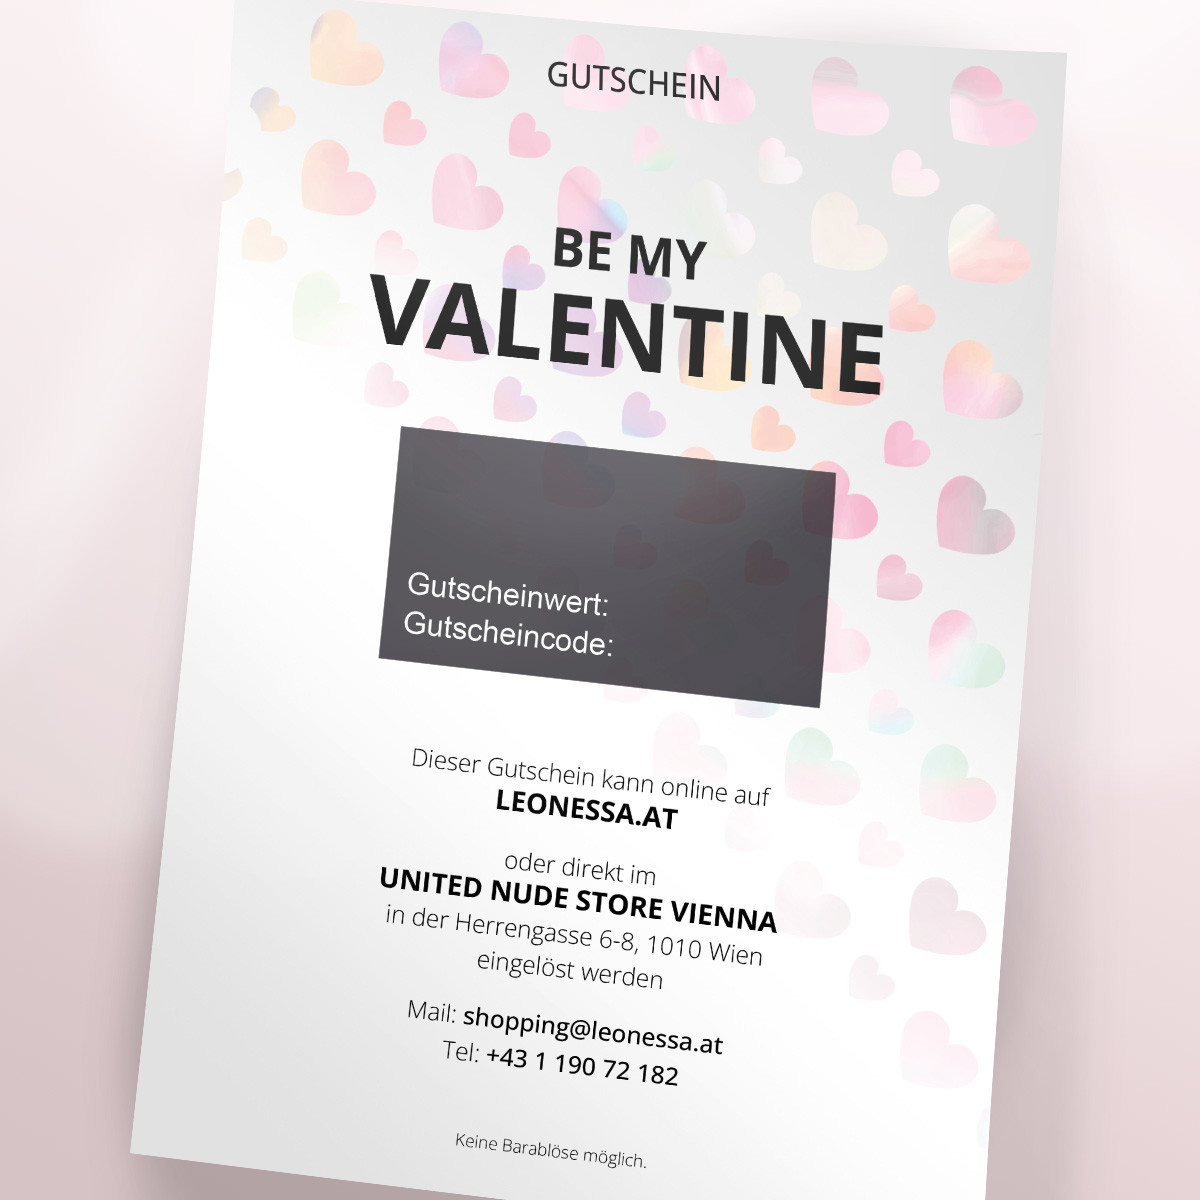 Our customizable Valentine's Day Voucher – the perfect gift